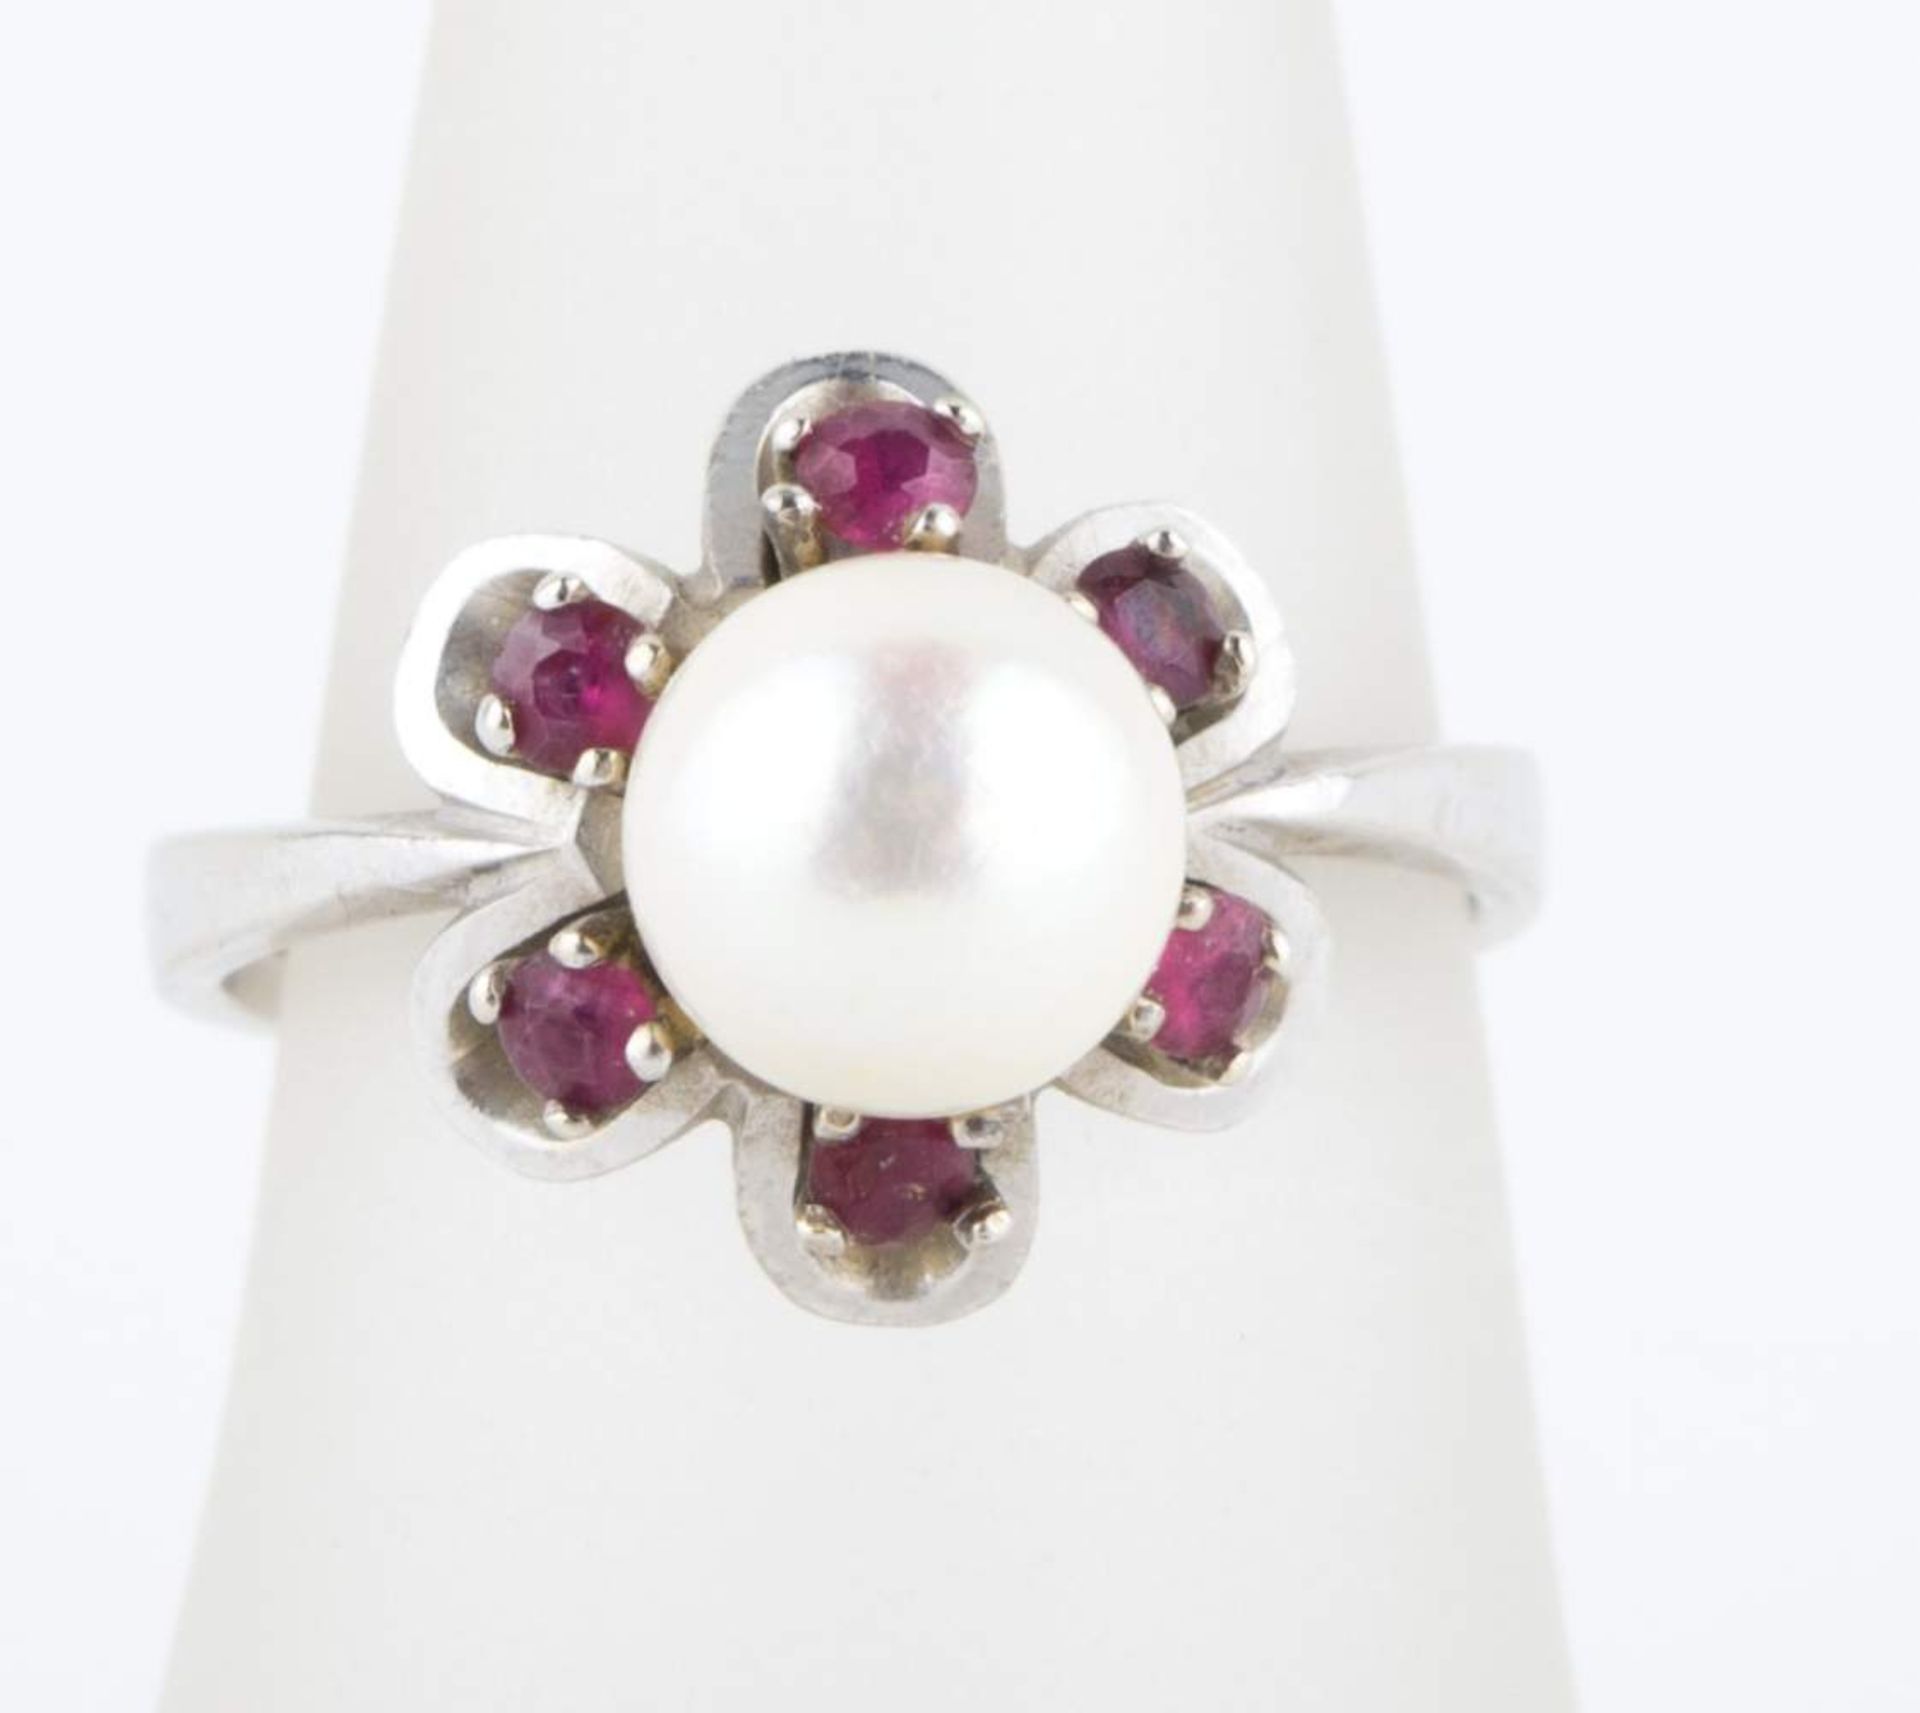 Damenring / Women´s ringmit Perle und Rubinen, 5 g, RG: 58 /with pearls and rubys, 5 g. - Image 2 of 2